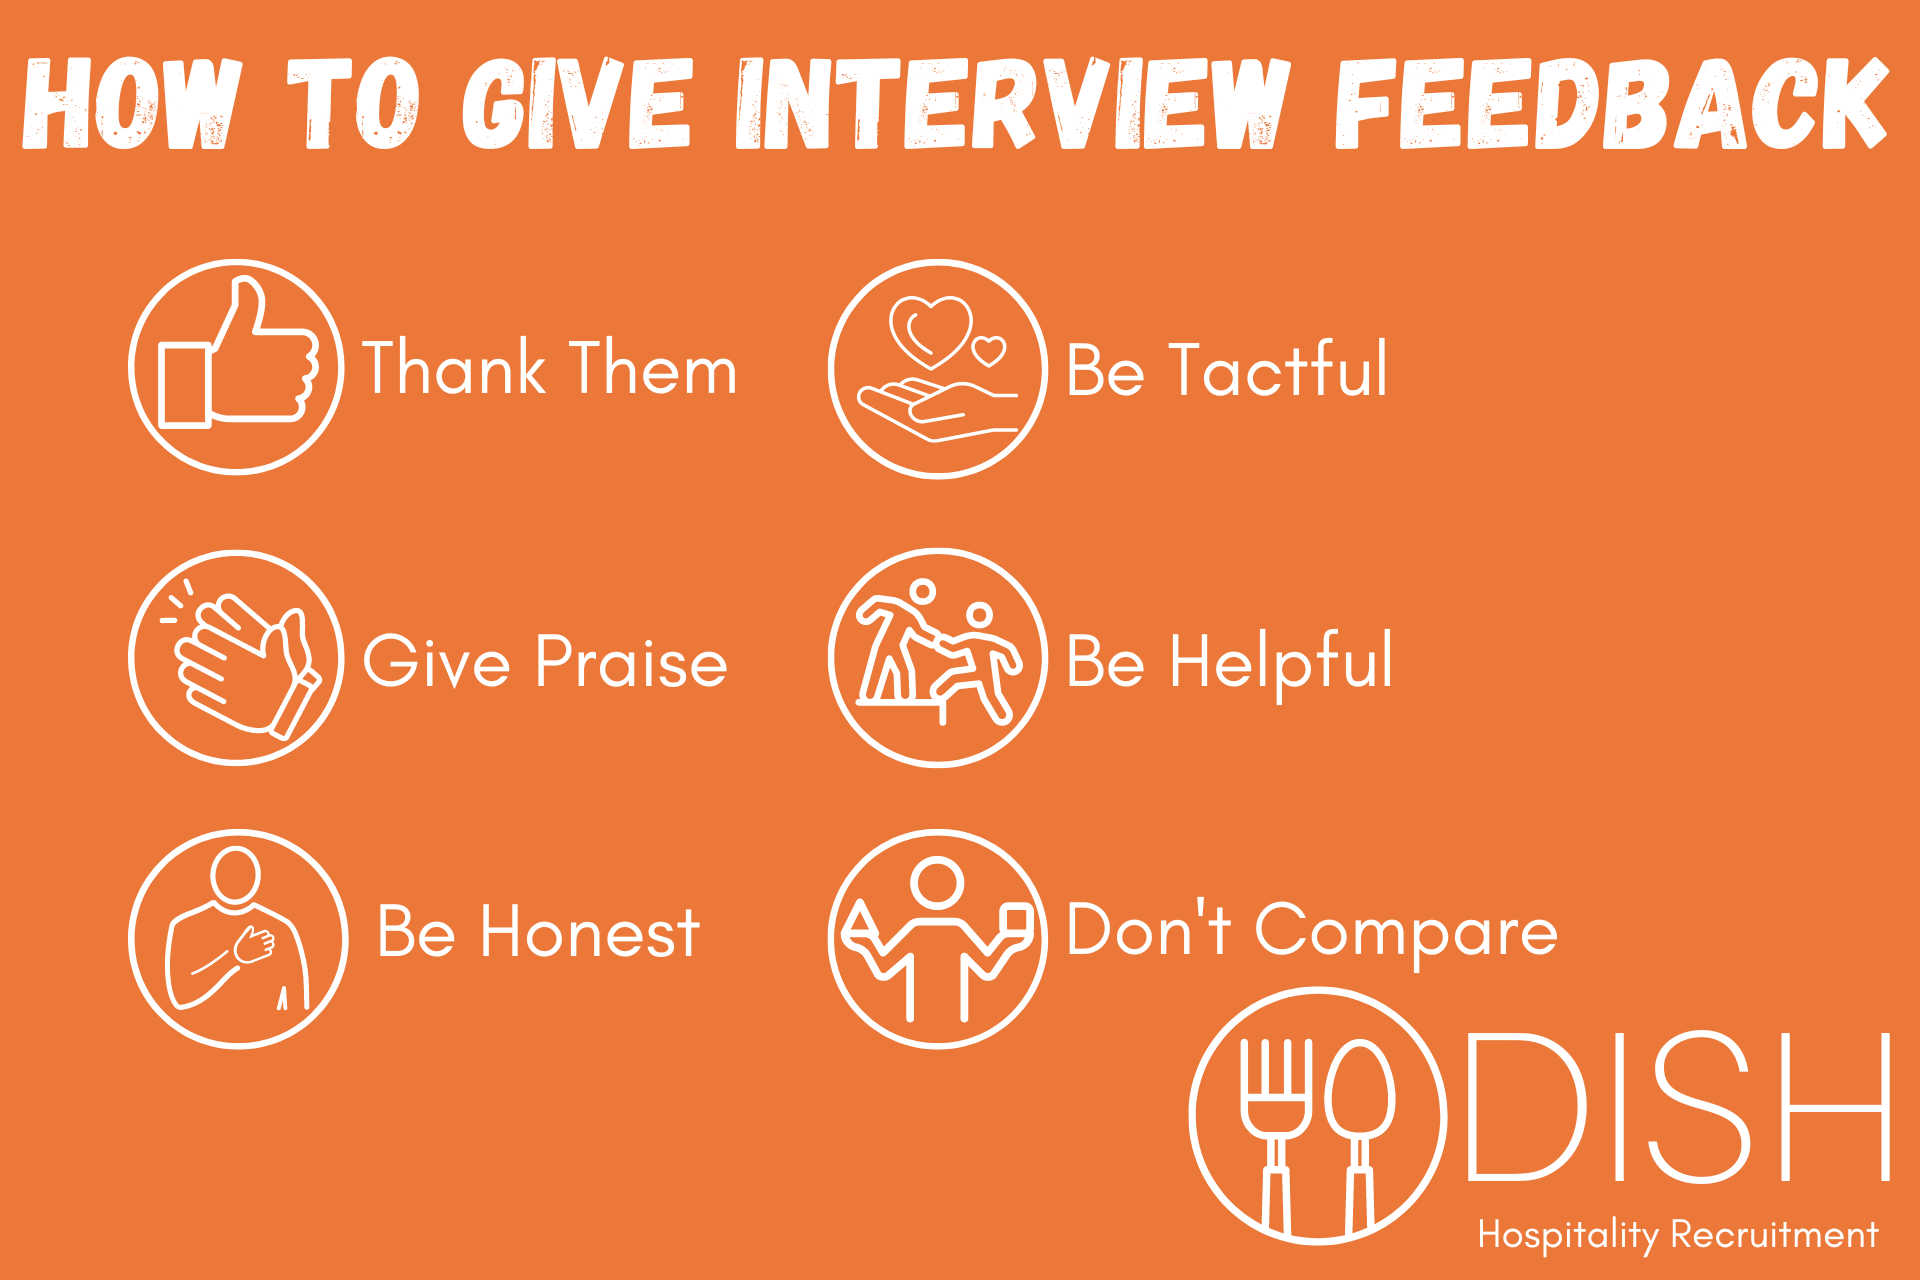 How to Give Interview Feedback to Unsuccessful Candidates